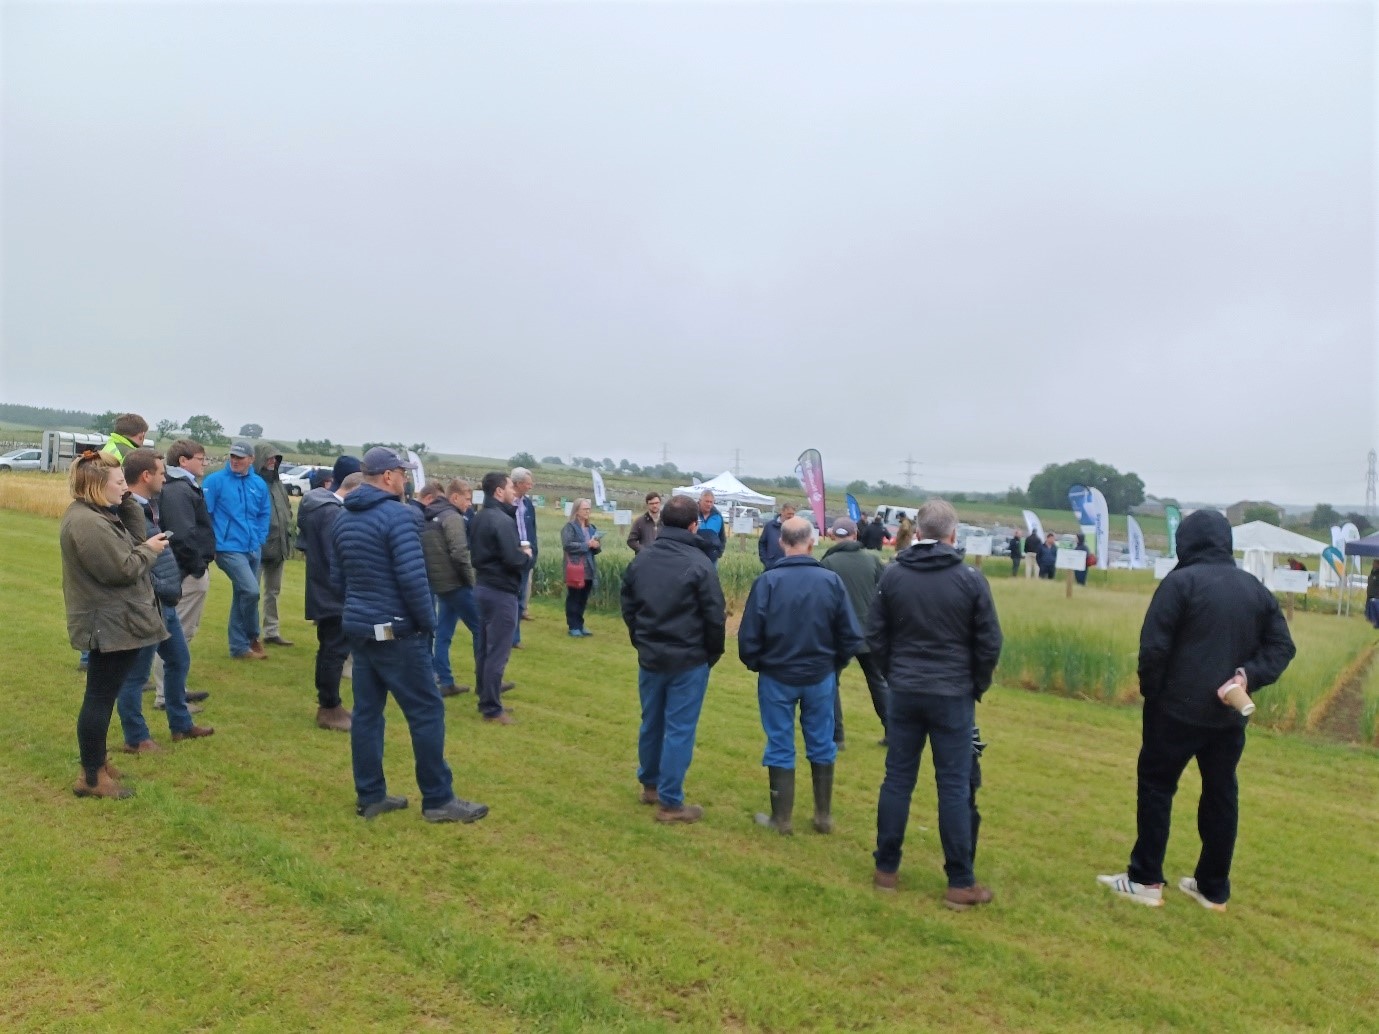 One of the farmer groups touring the variety plots at Arable Scotland.